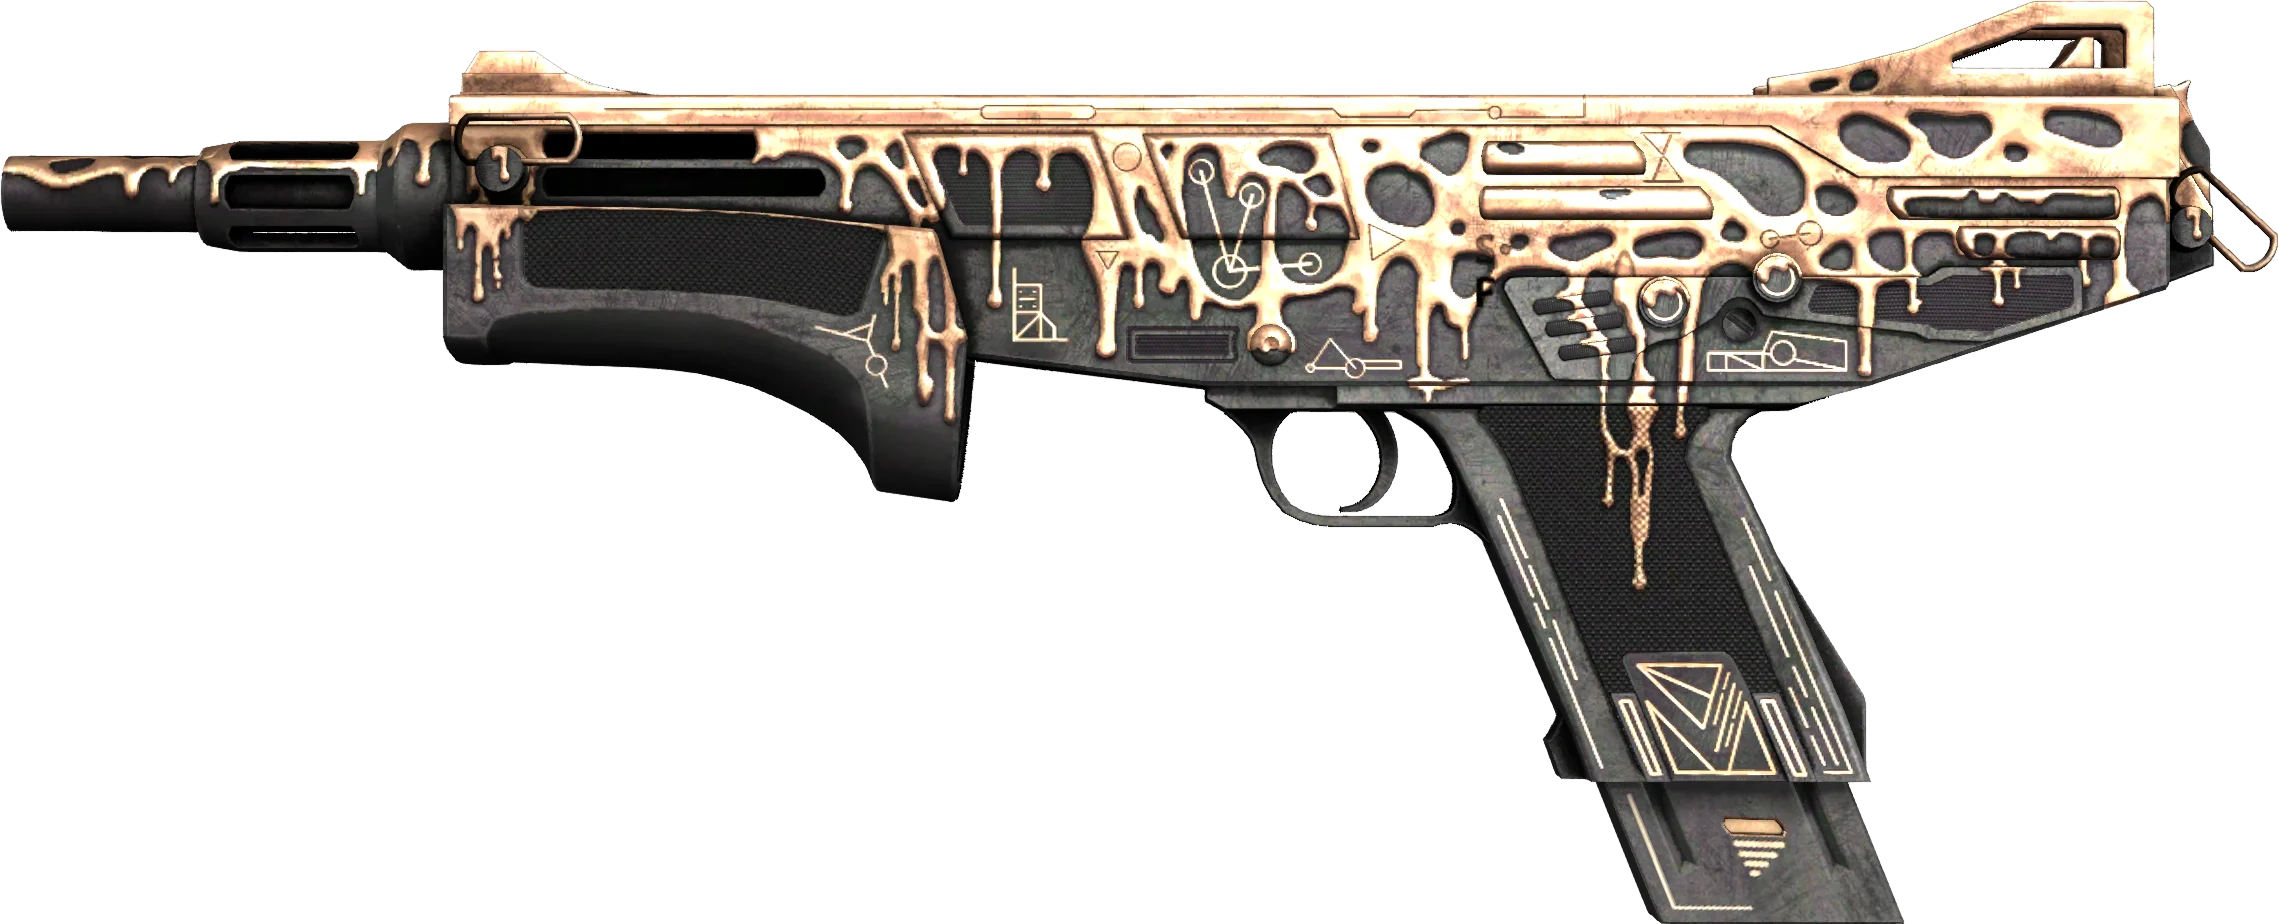 MAG-7 Copper Coated